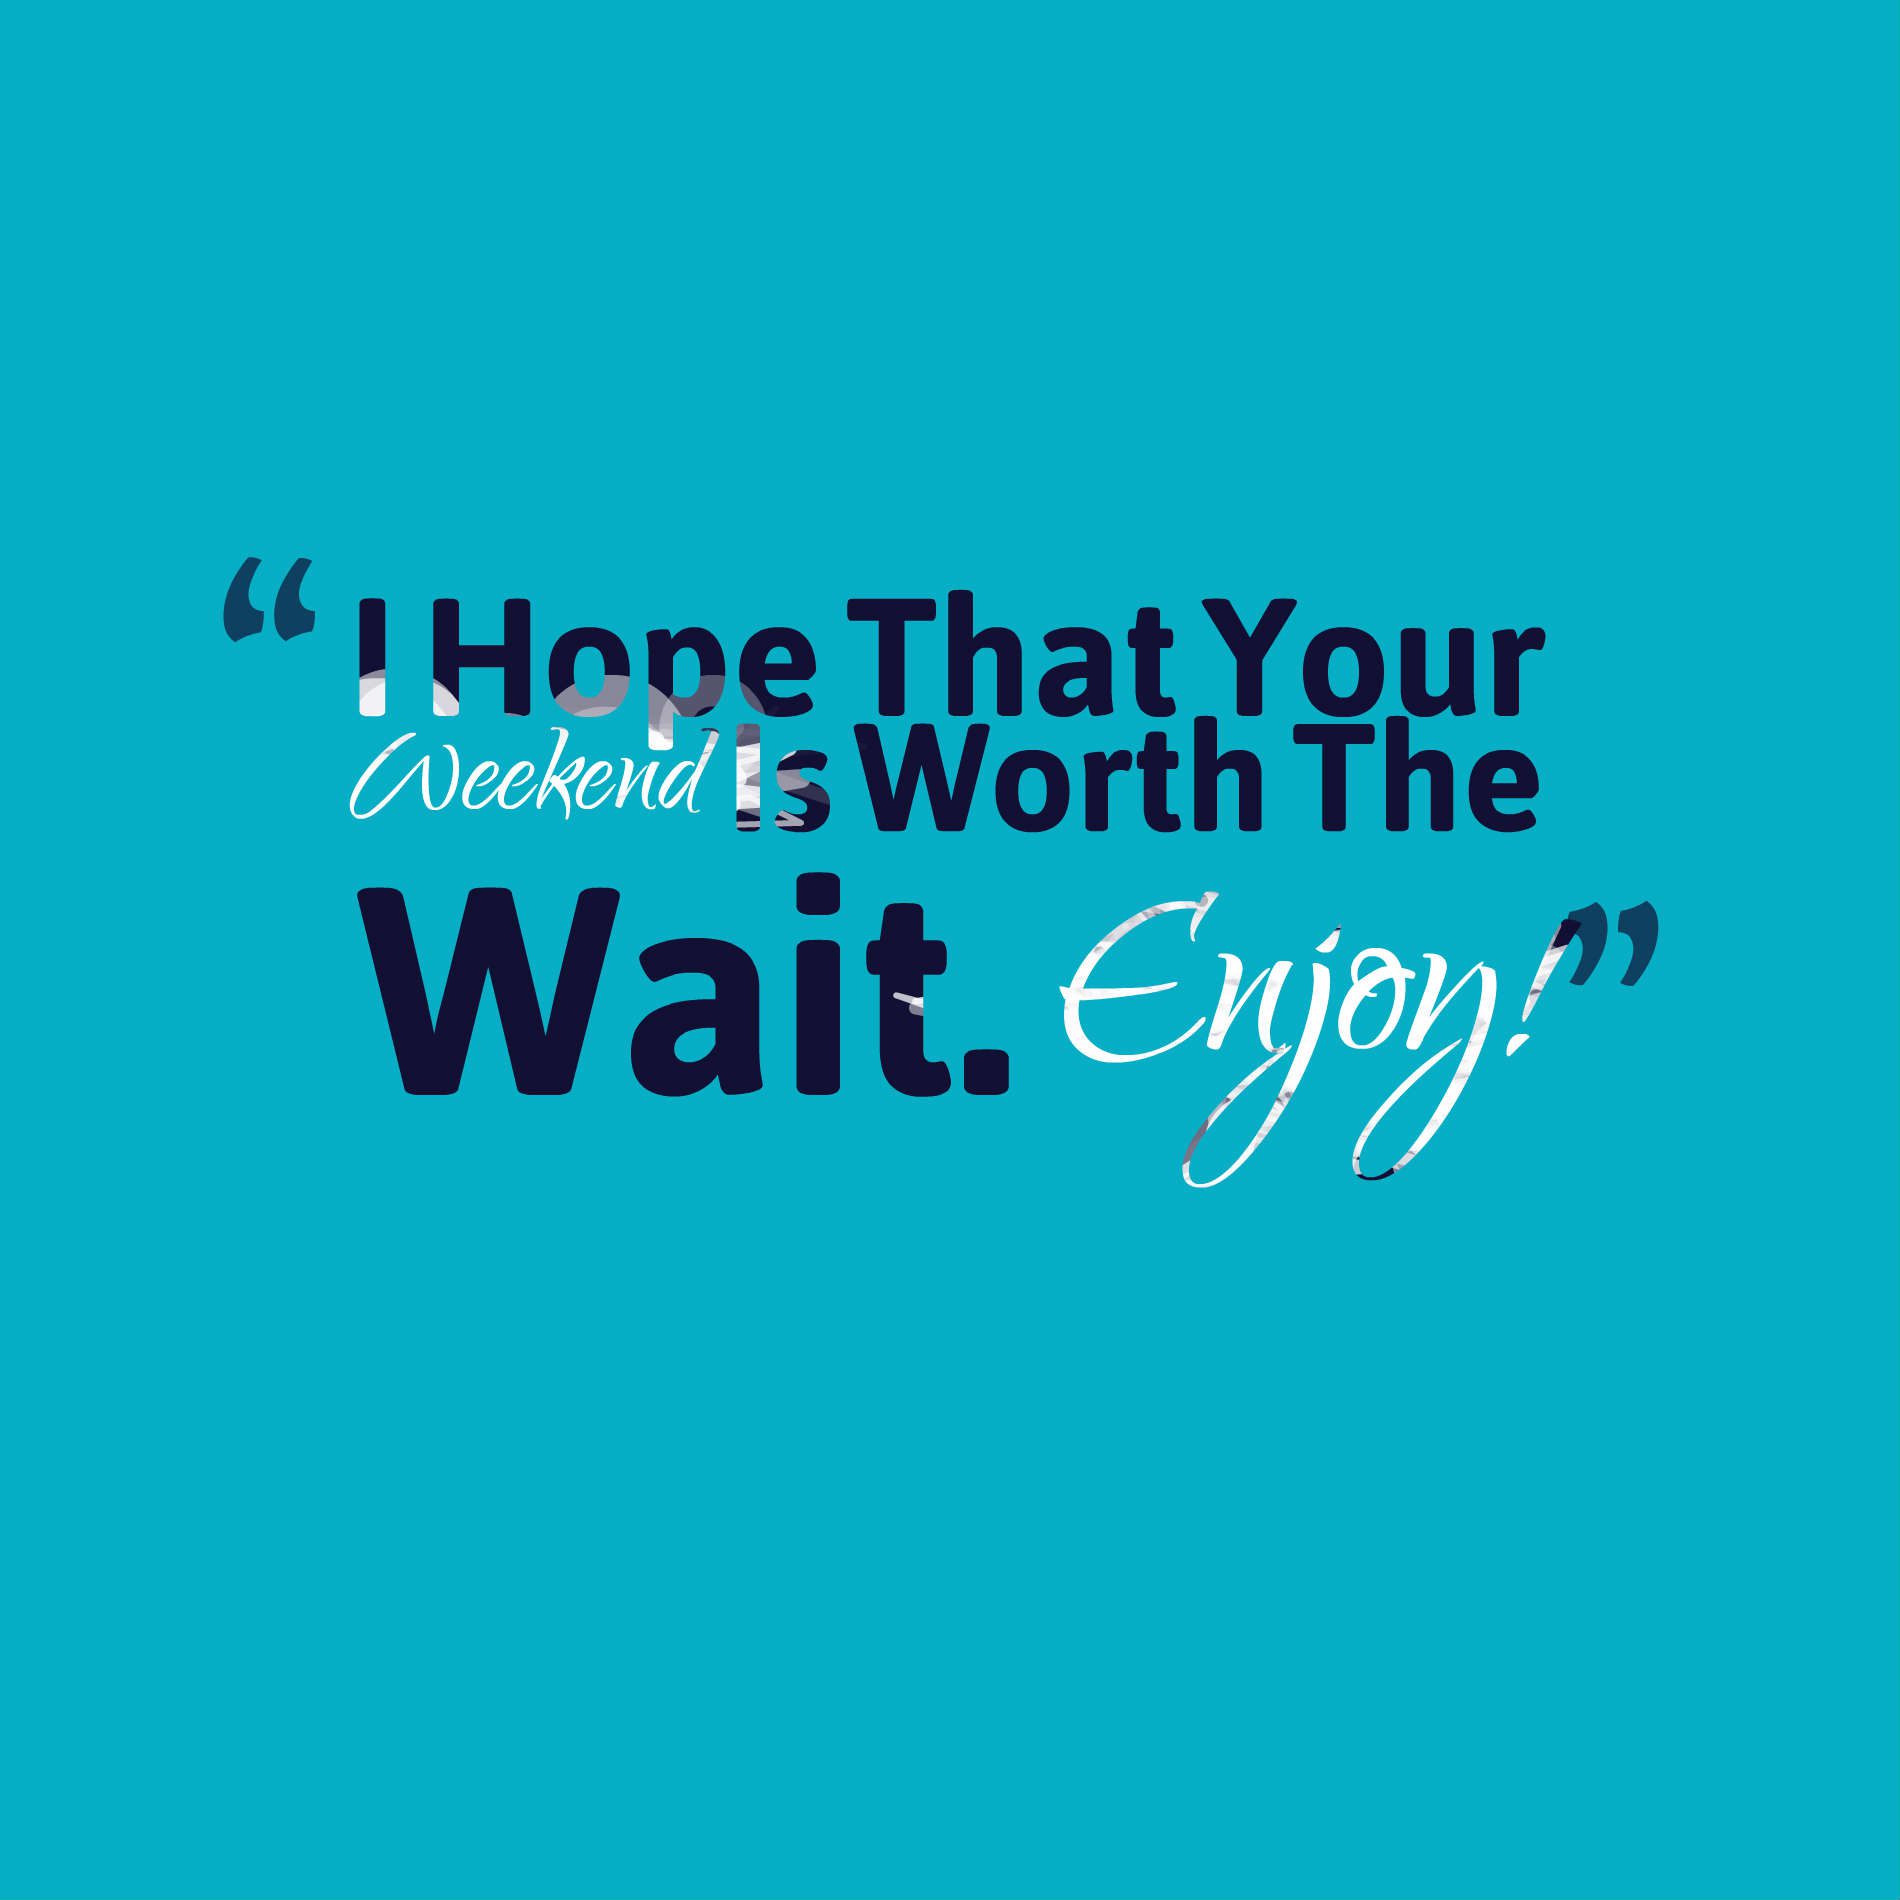 I Hope That Your Weekend Is Worth The Wait. Enjoy!